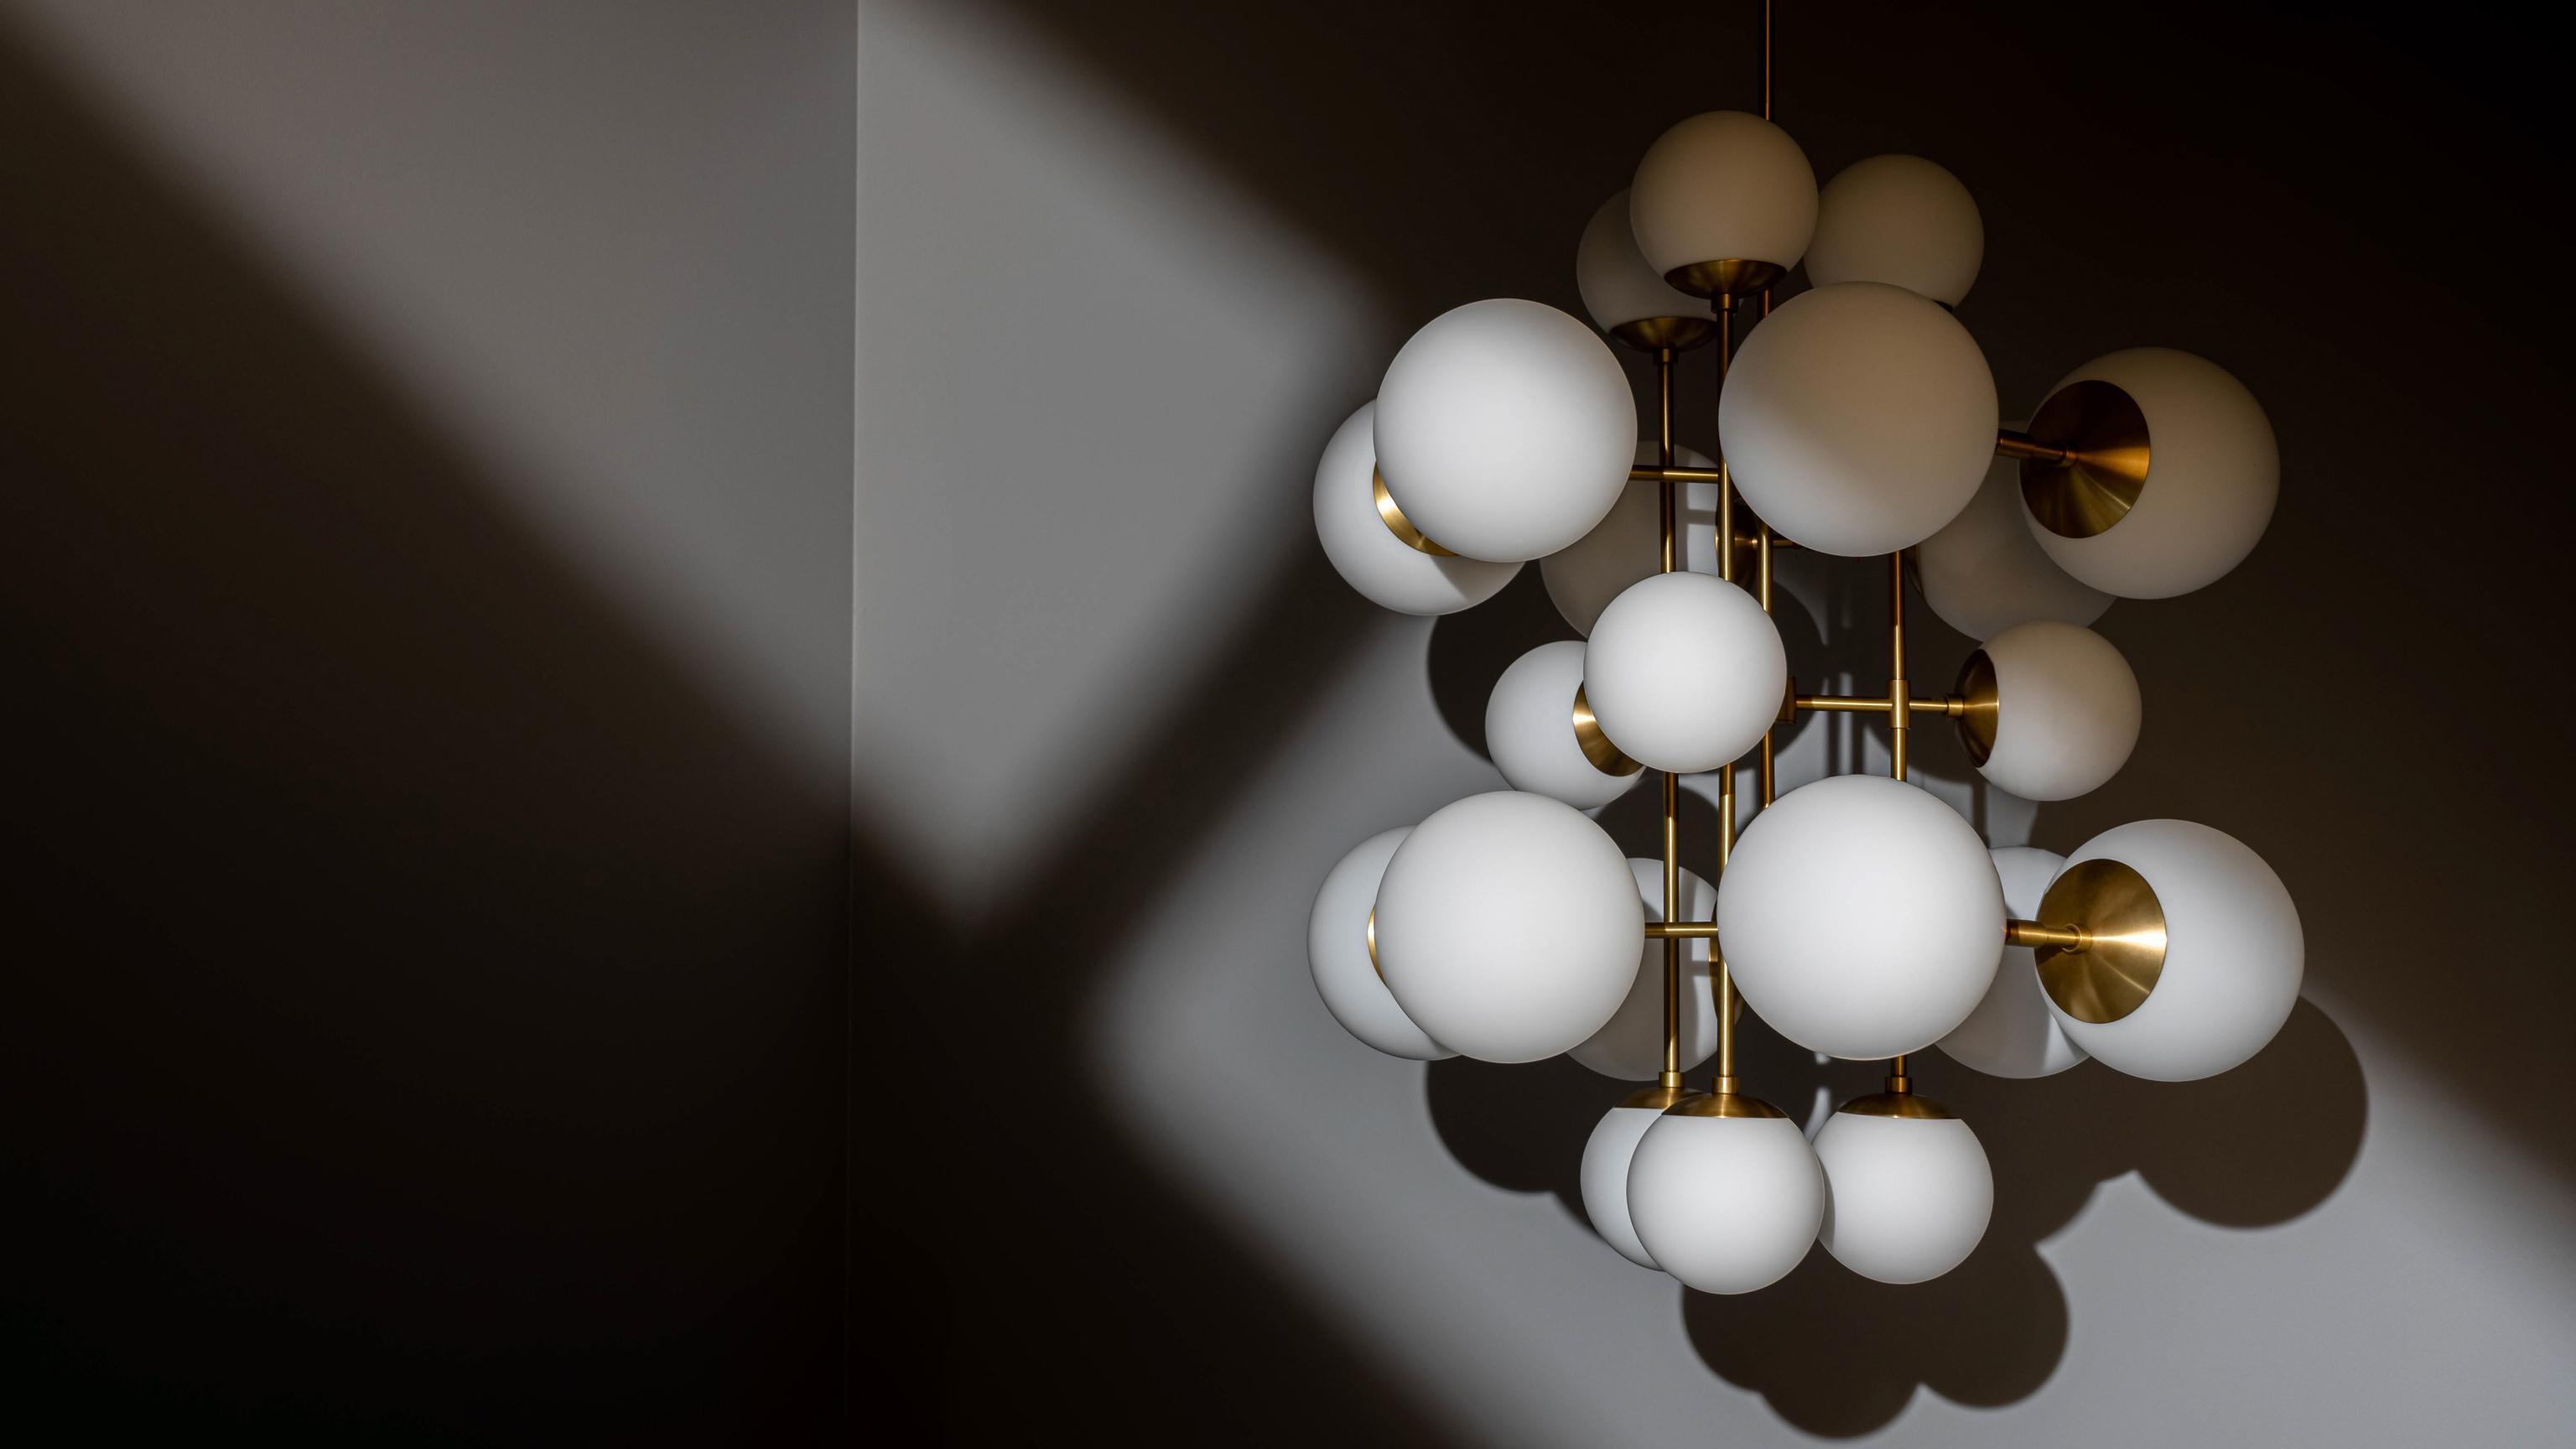 A kaleidoscope of glass spheres perambulates around a linear brass frame. Made with two sizes of glass globes, available in three types of signature glass, the shifting symmetries and enchanting interplay of configurations create changing patterns